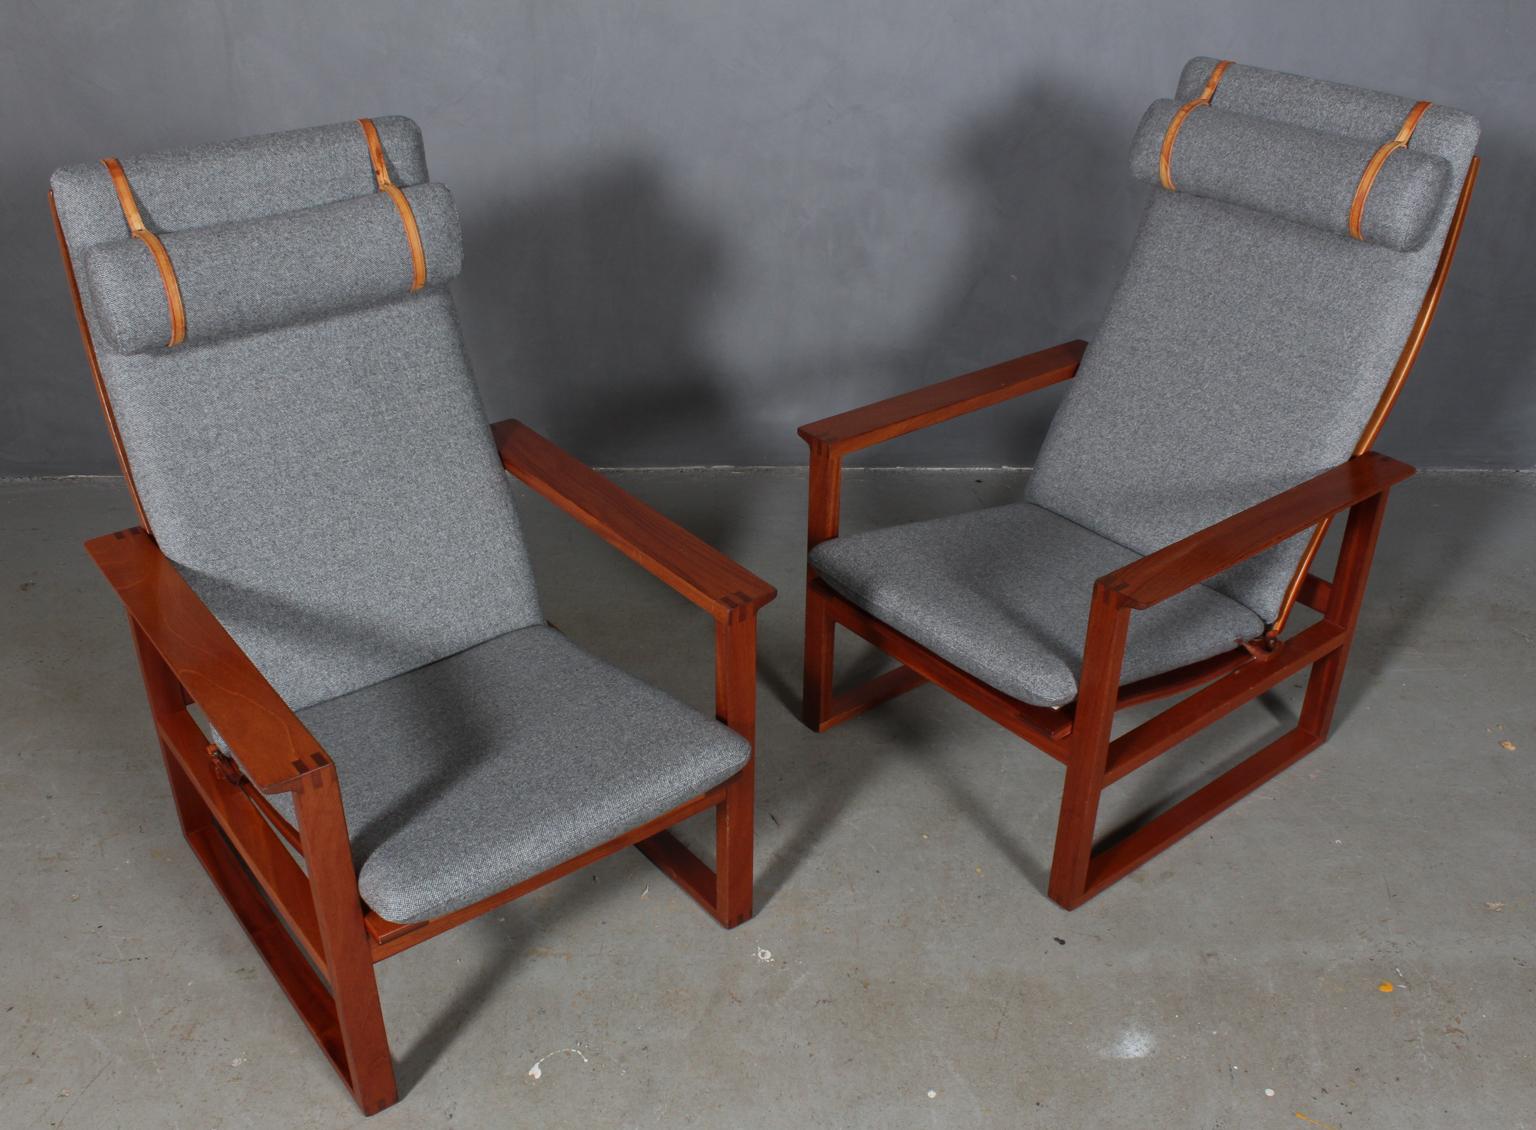 A Børge Mogensen lounge chairs designed in 1956 model number 2254 for Fredericia Stolefabrik. Cubical frames made of solid mahogany with finger joints and cane. 

Reupholstered in grey wool fabric. The seat cushion can be fixed with a leather